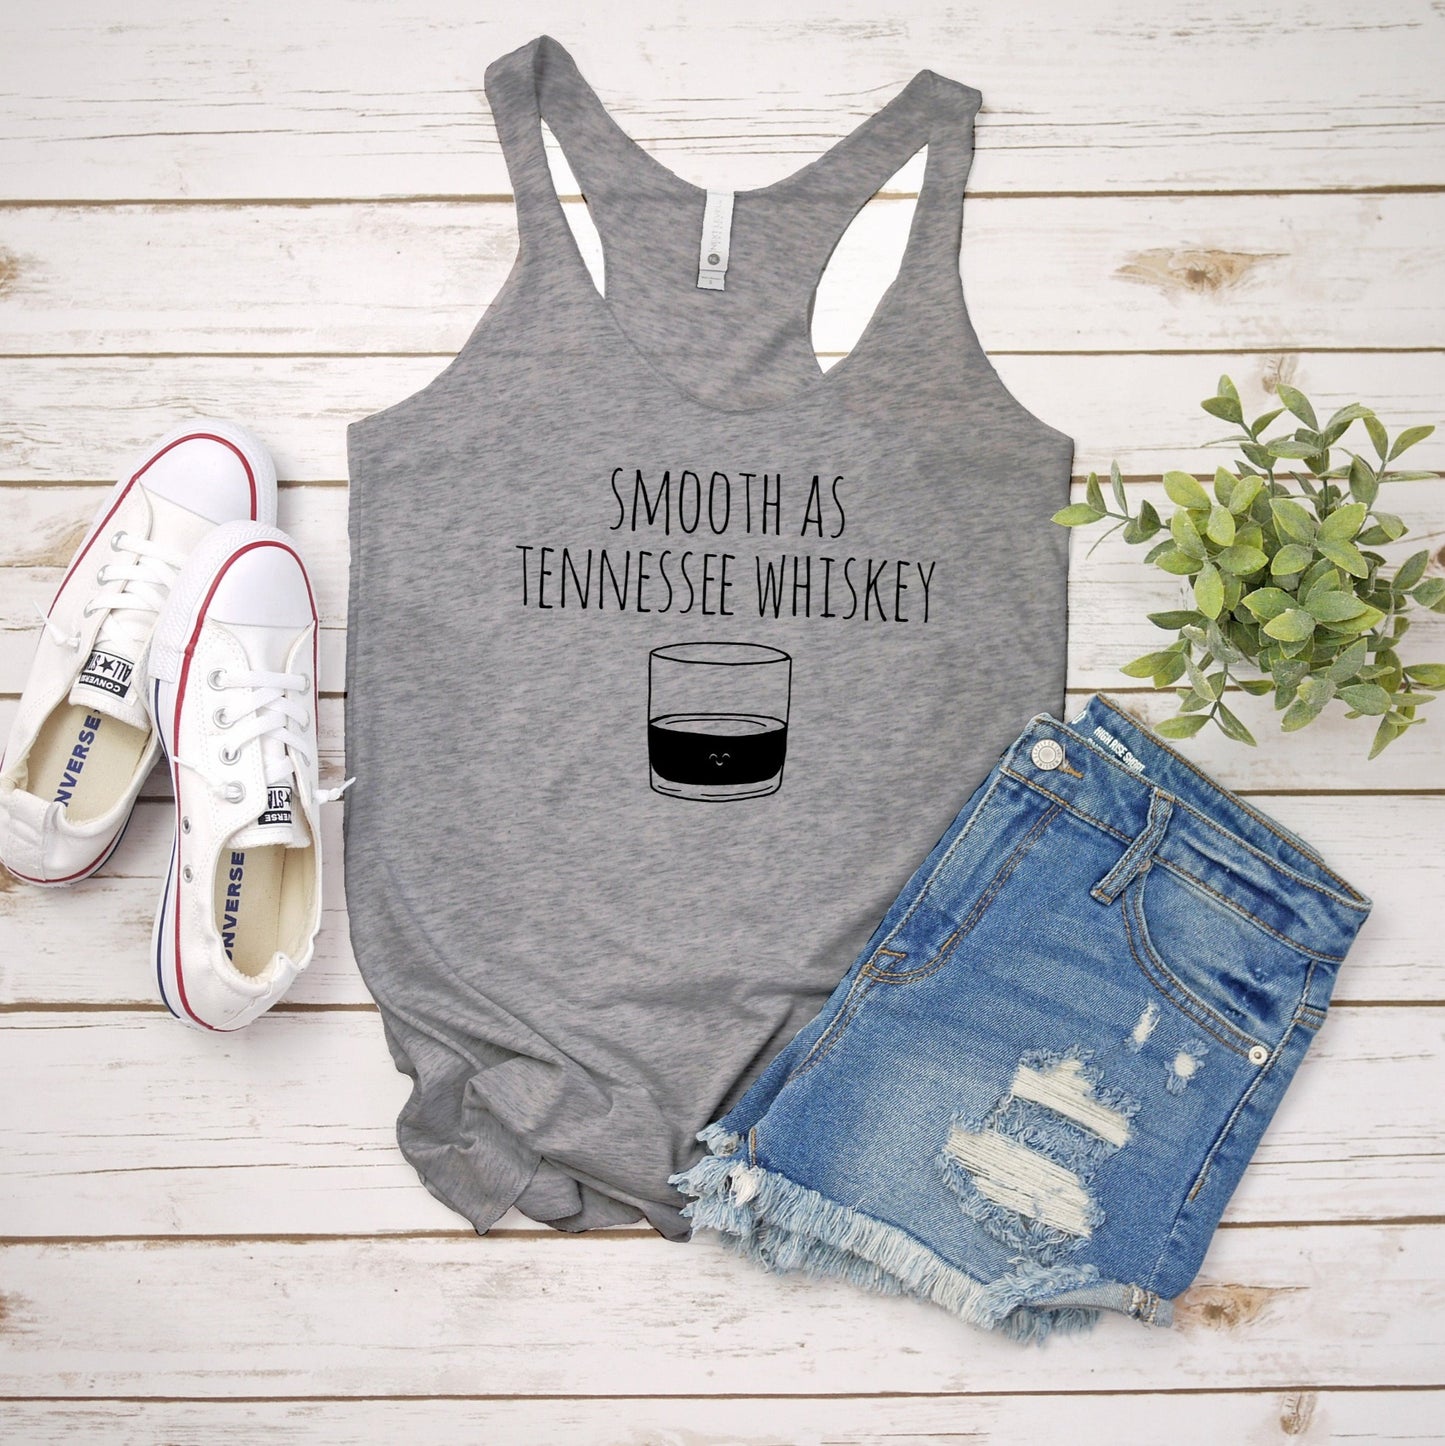 Smooth as Tennessee Whiskey - Women's Tank - Heather Gray, Tahiti, or Envy